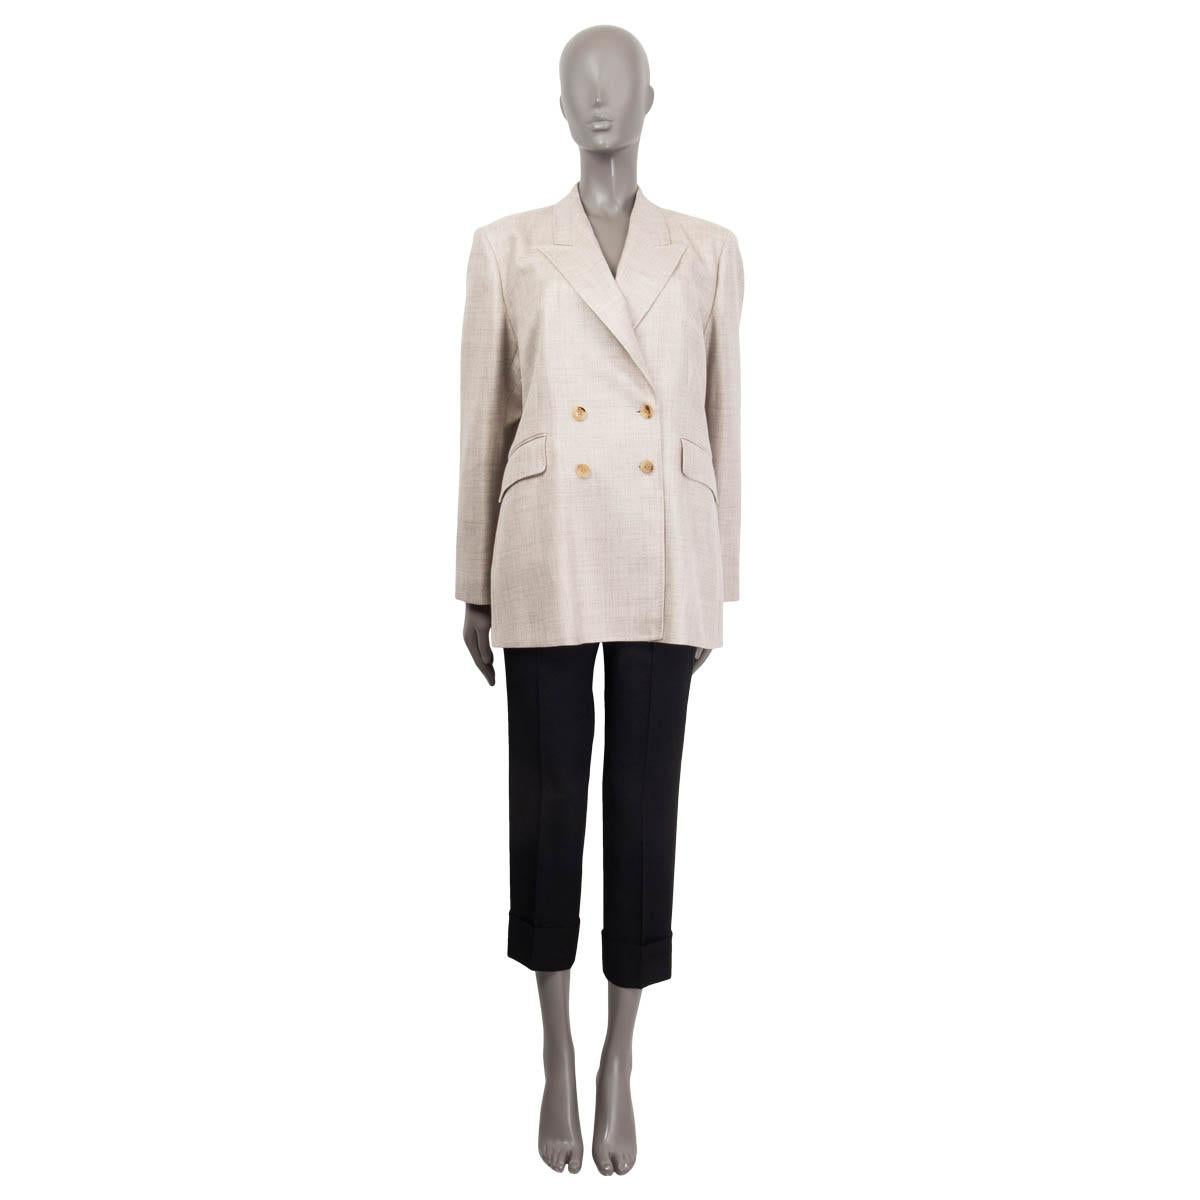 100% authentic Gabriela Hearst 'Angela' double breasted blazer in cream wool (49%), silk (30%) and linen (21%). Features peak lapels, two flap pockets and buttoned cuffs. Opens with two buttons on the front. Lined in off-white silk (100%). Brand